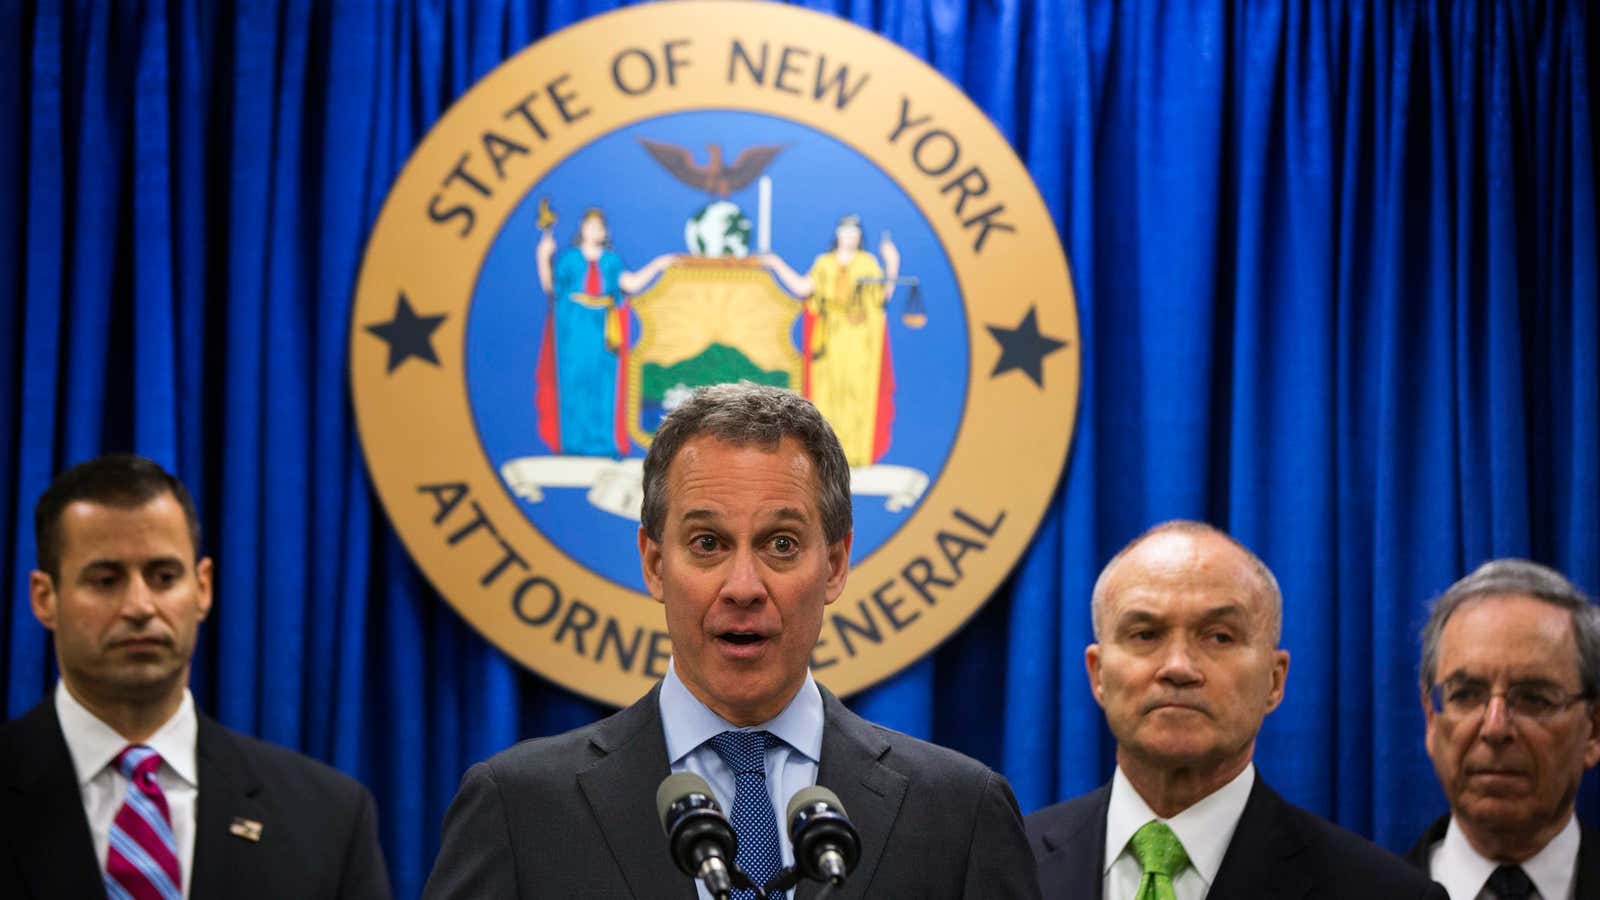 If Eric Schneiderman wants to police markets, he ought to look at exchange rebates.